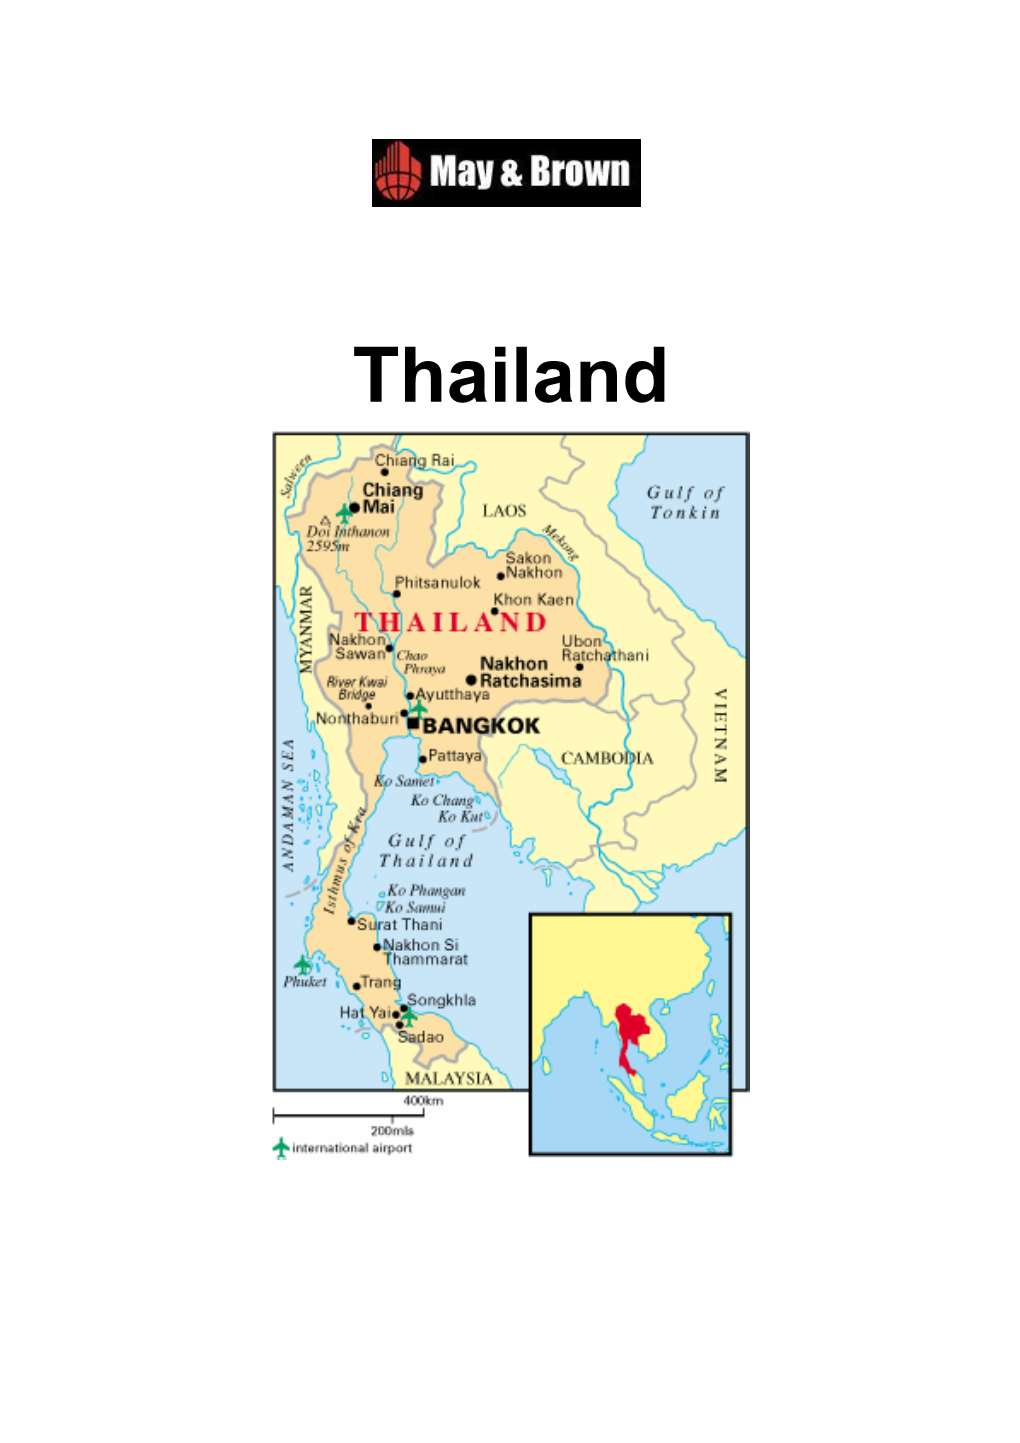 Thailand Table of Contents: Thailand